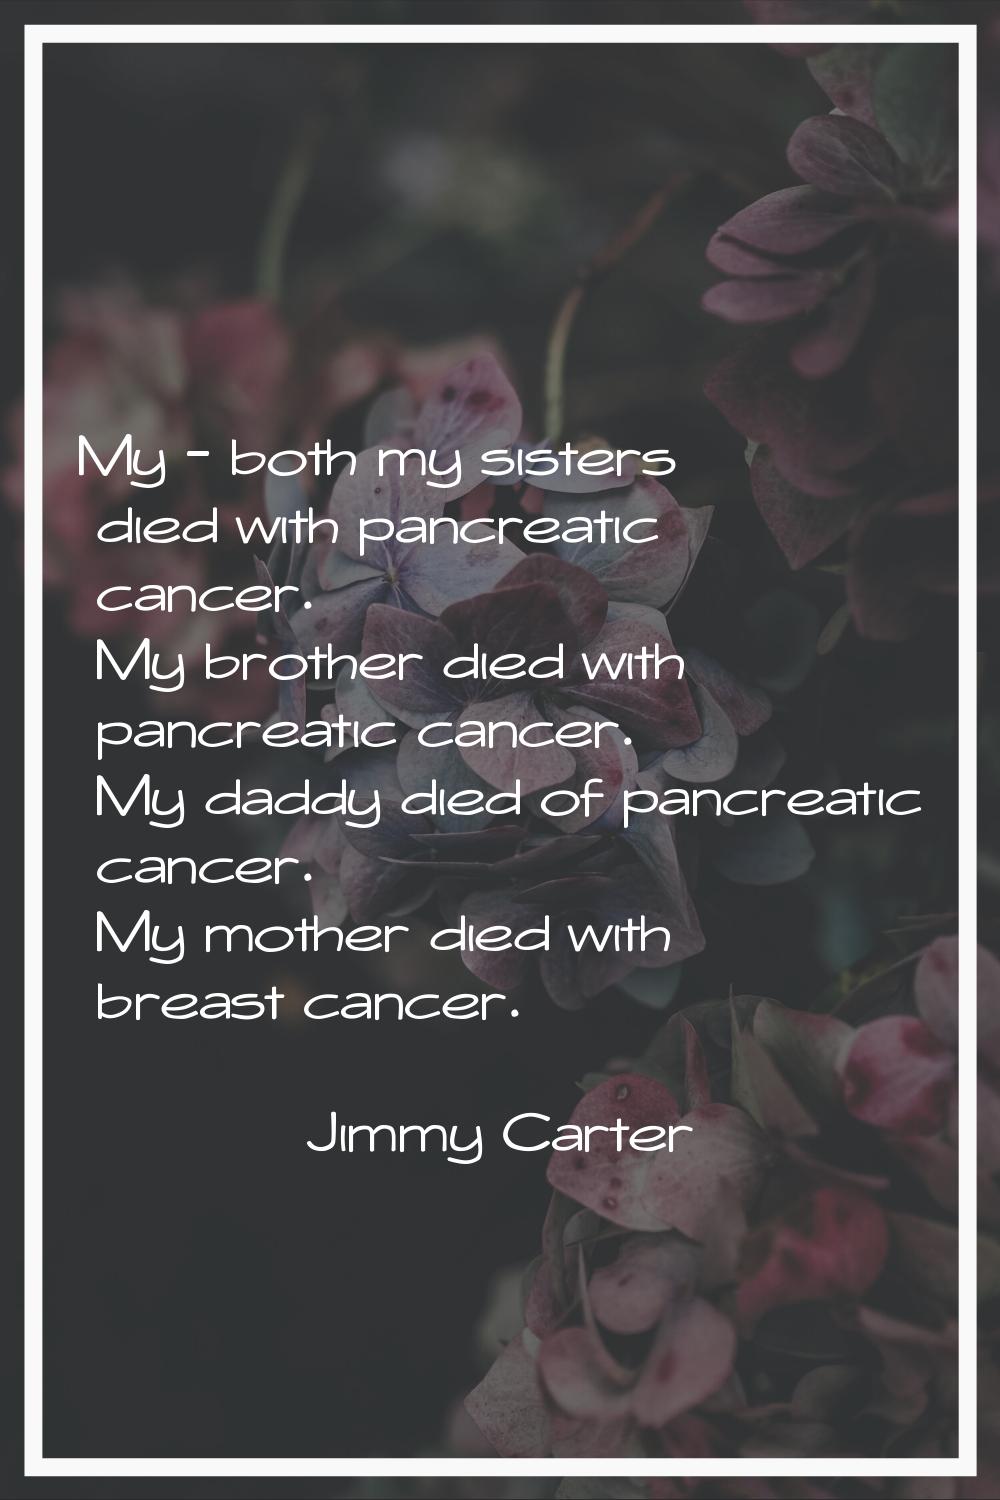 My - both my sisters died with pancreatic cancer. My brother died with pancreatic cancer. My daddy 